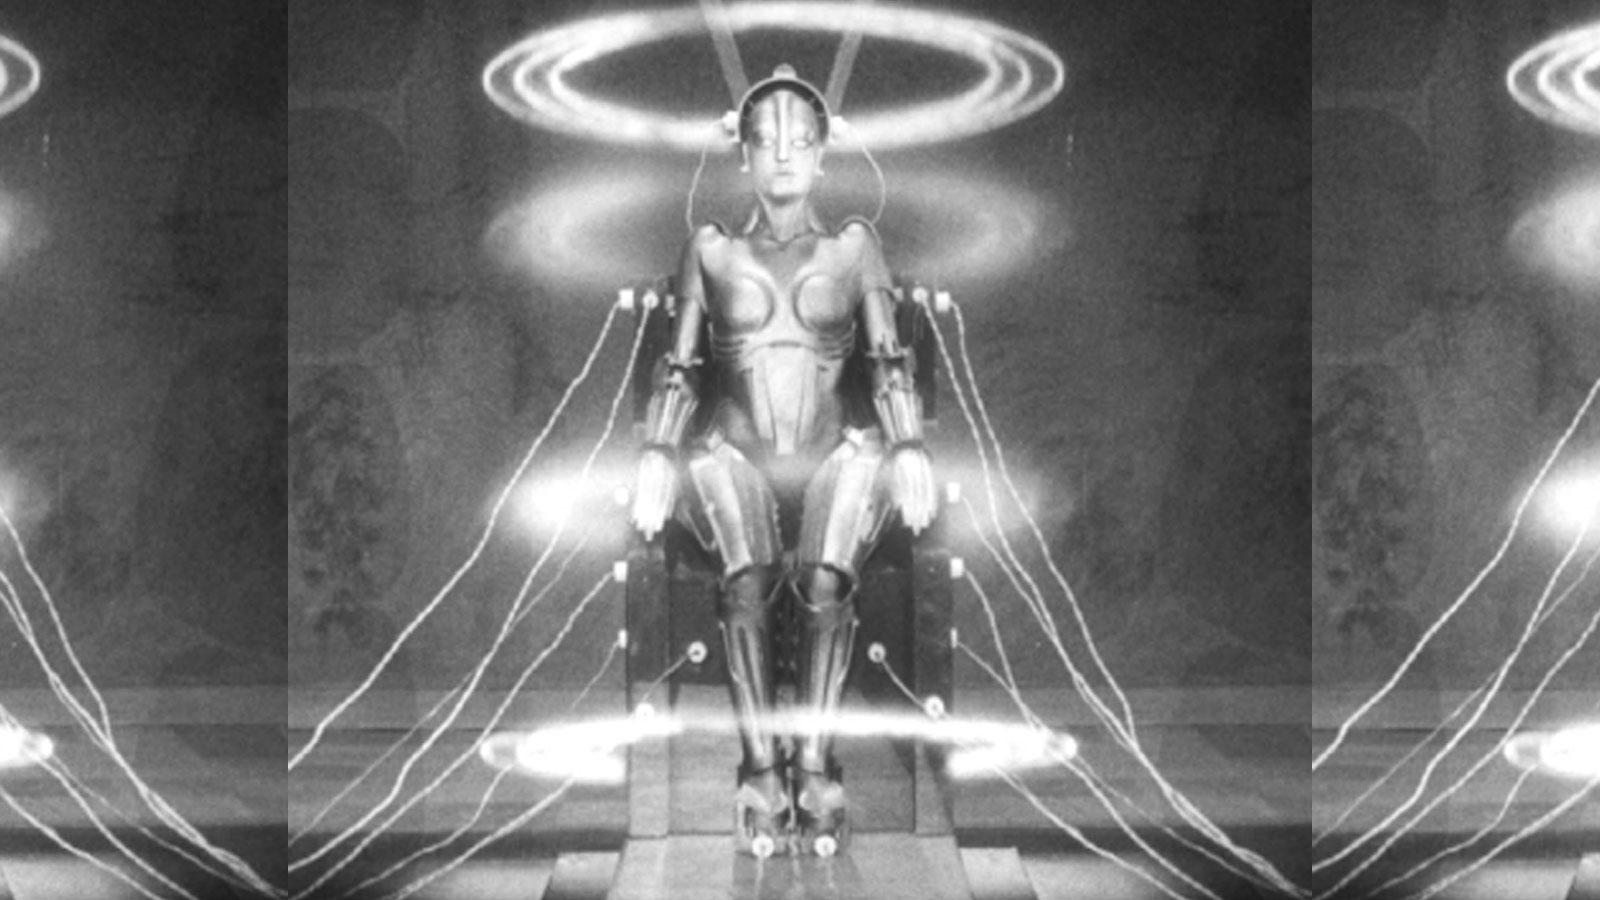 Mammon,
the android from Metropolis,
in a chair
with wires feeding into her head
